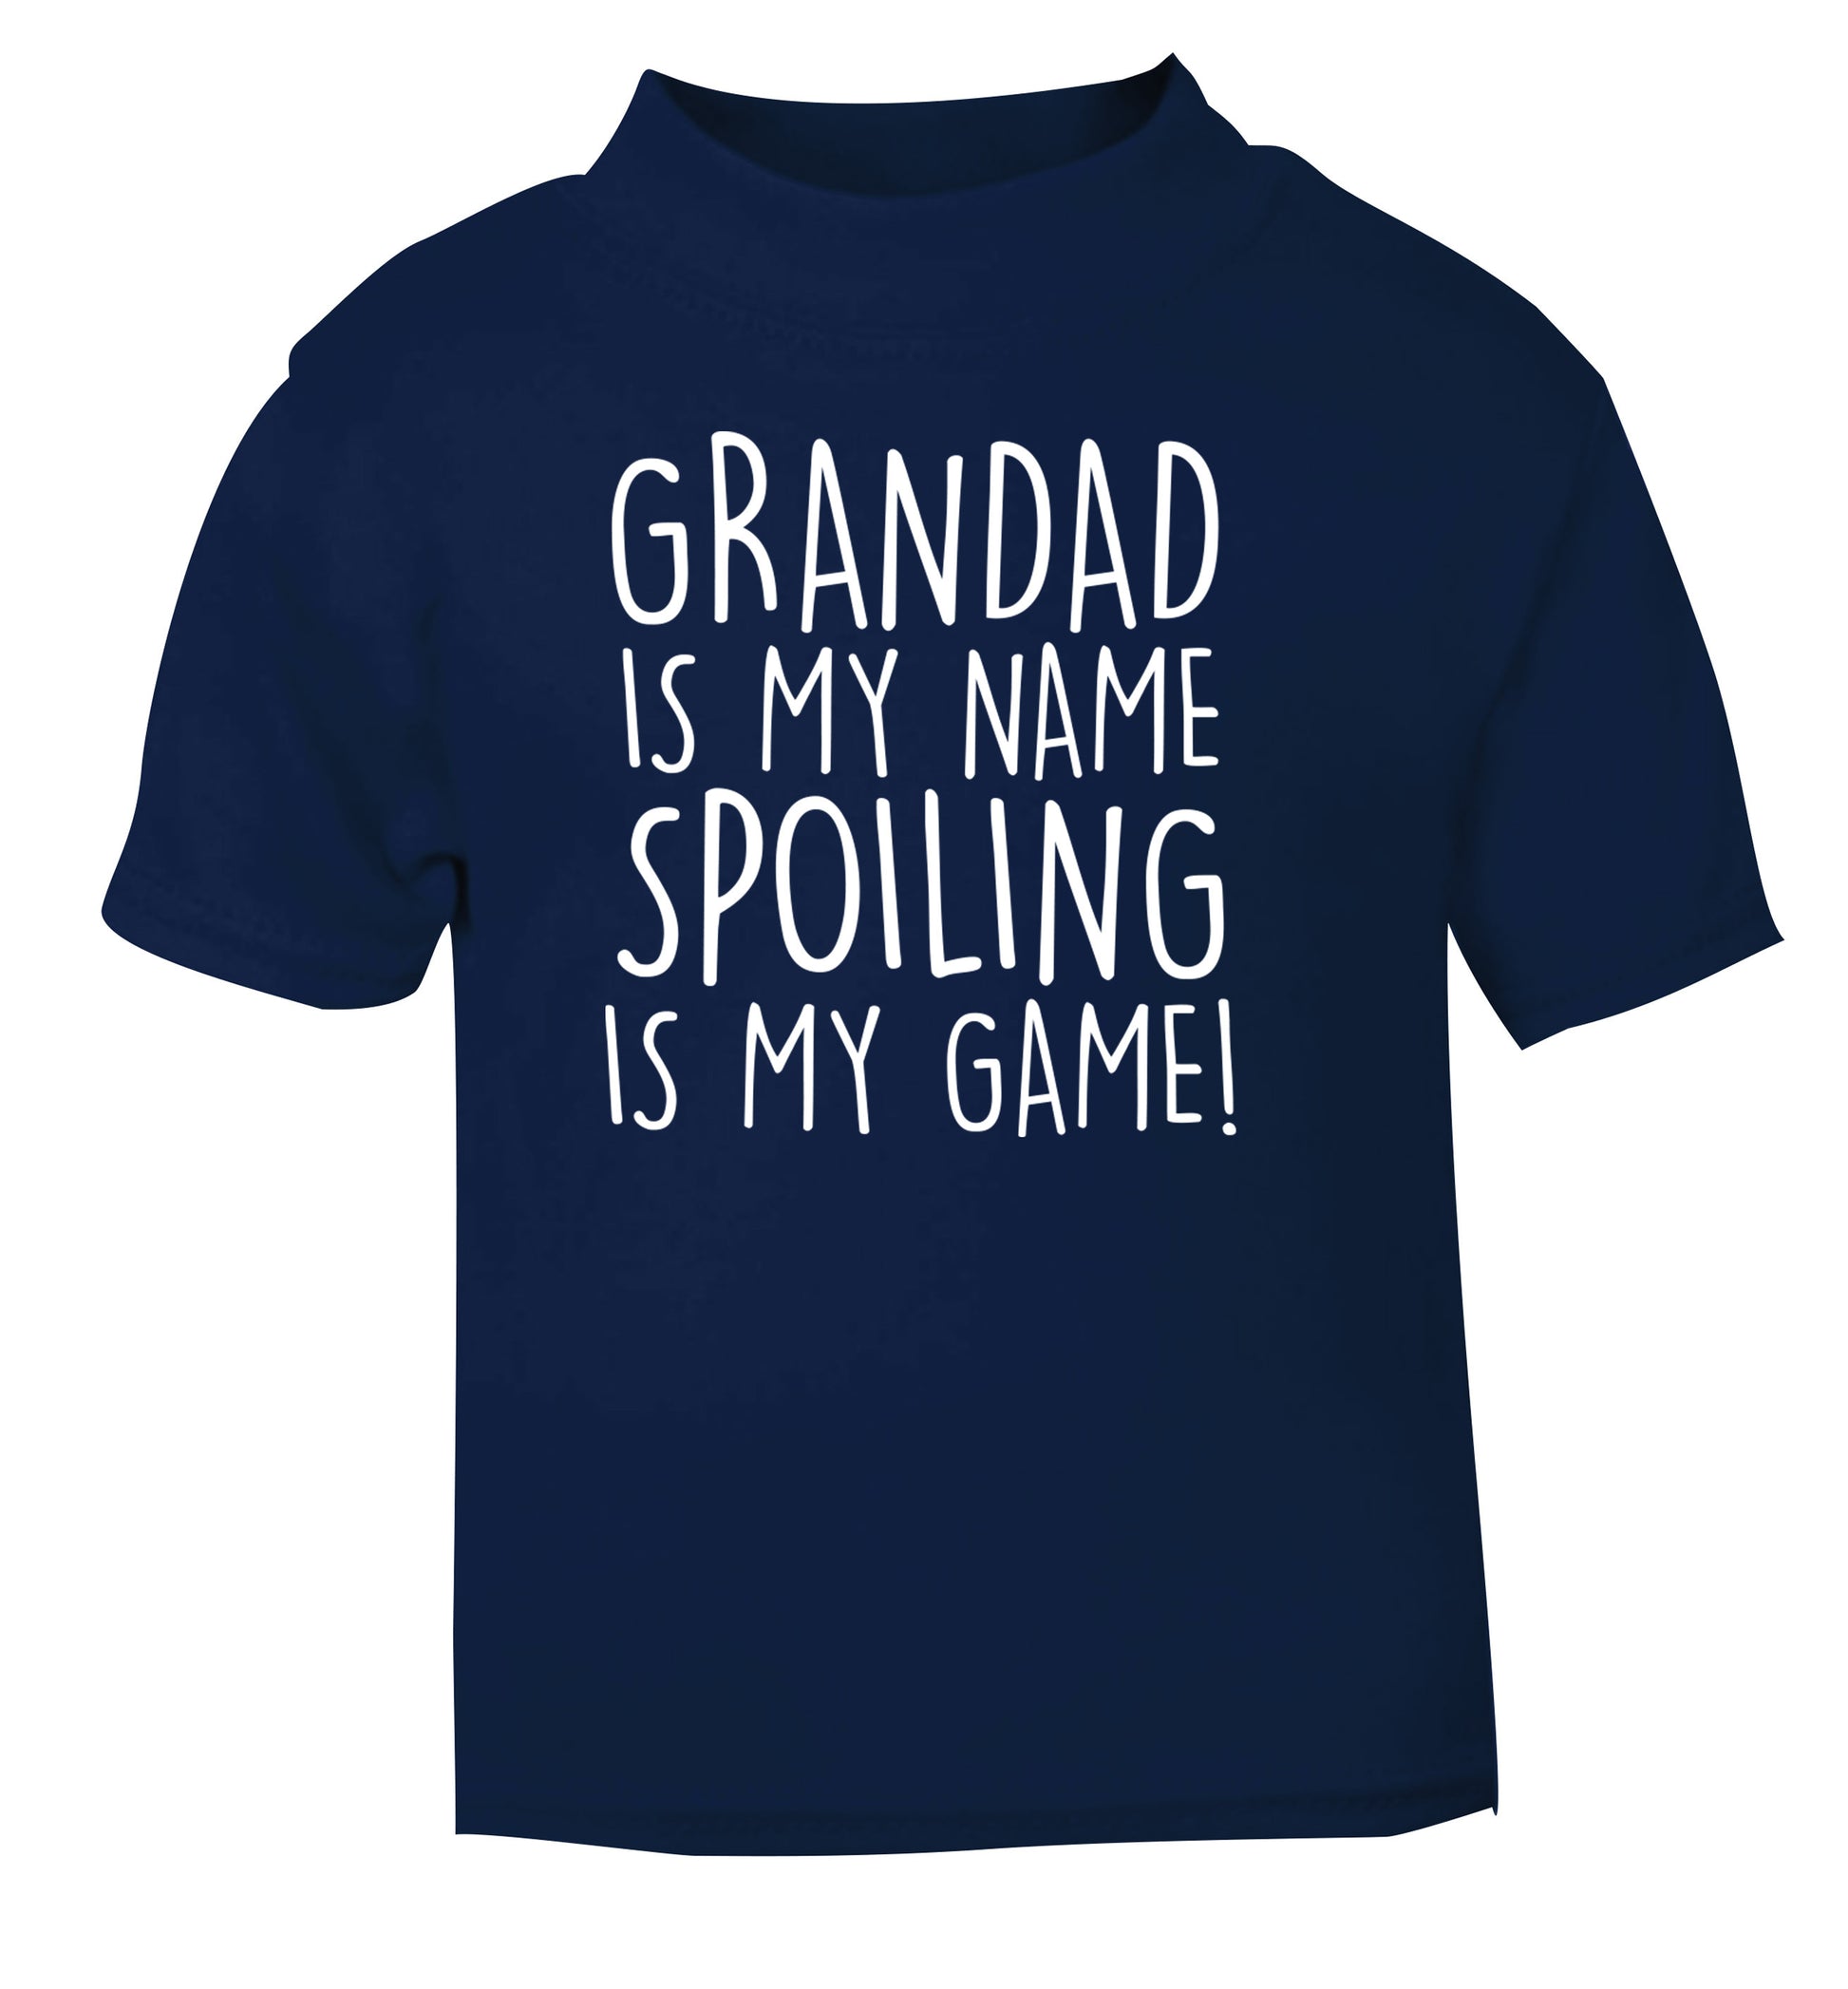 Grandad is my name, spoiling is my game navy Baby Toddler Tshirt 2 Years